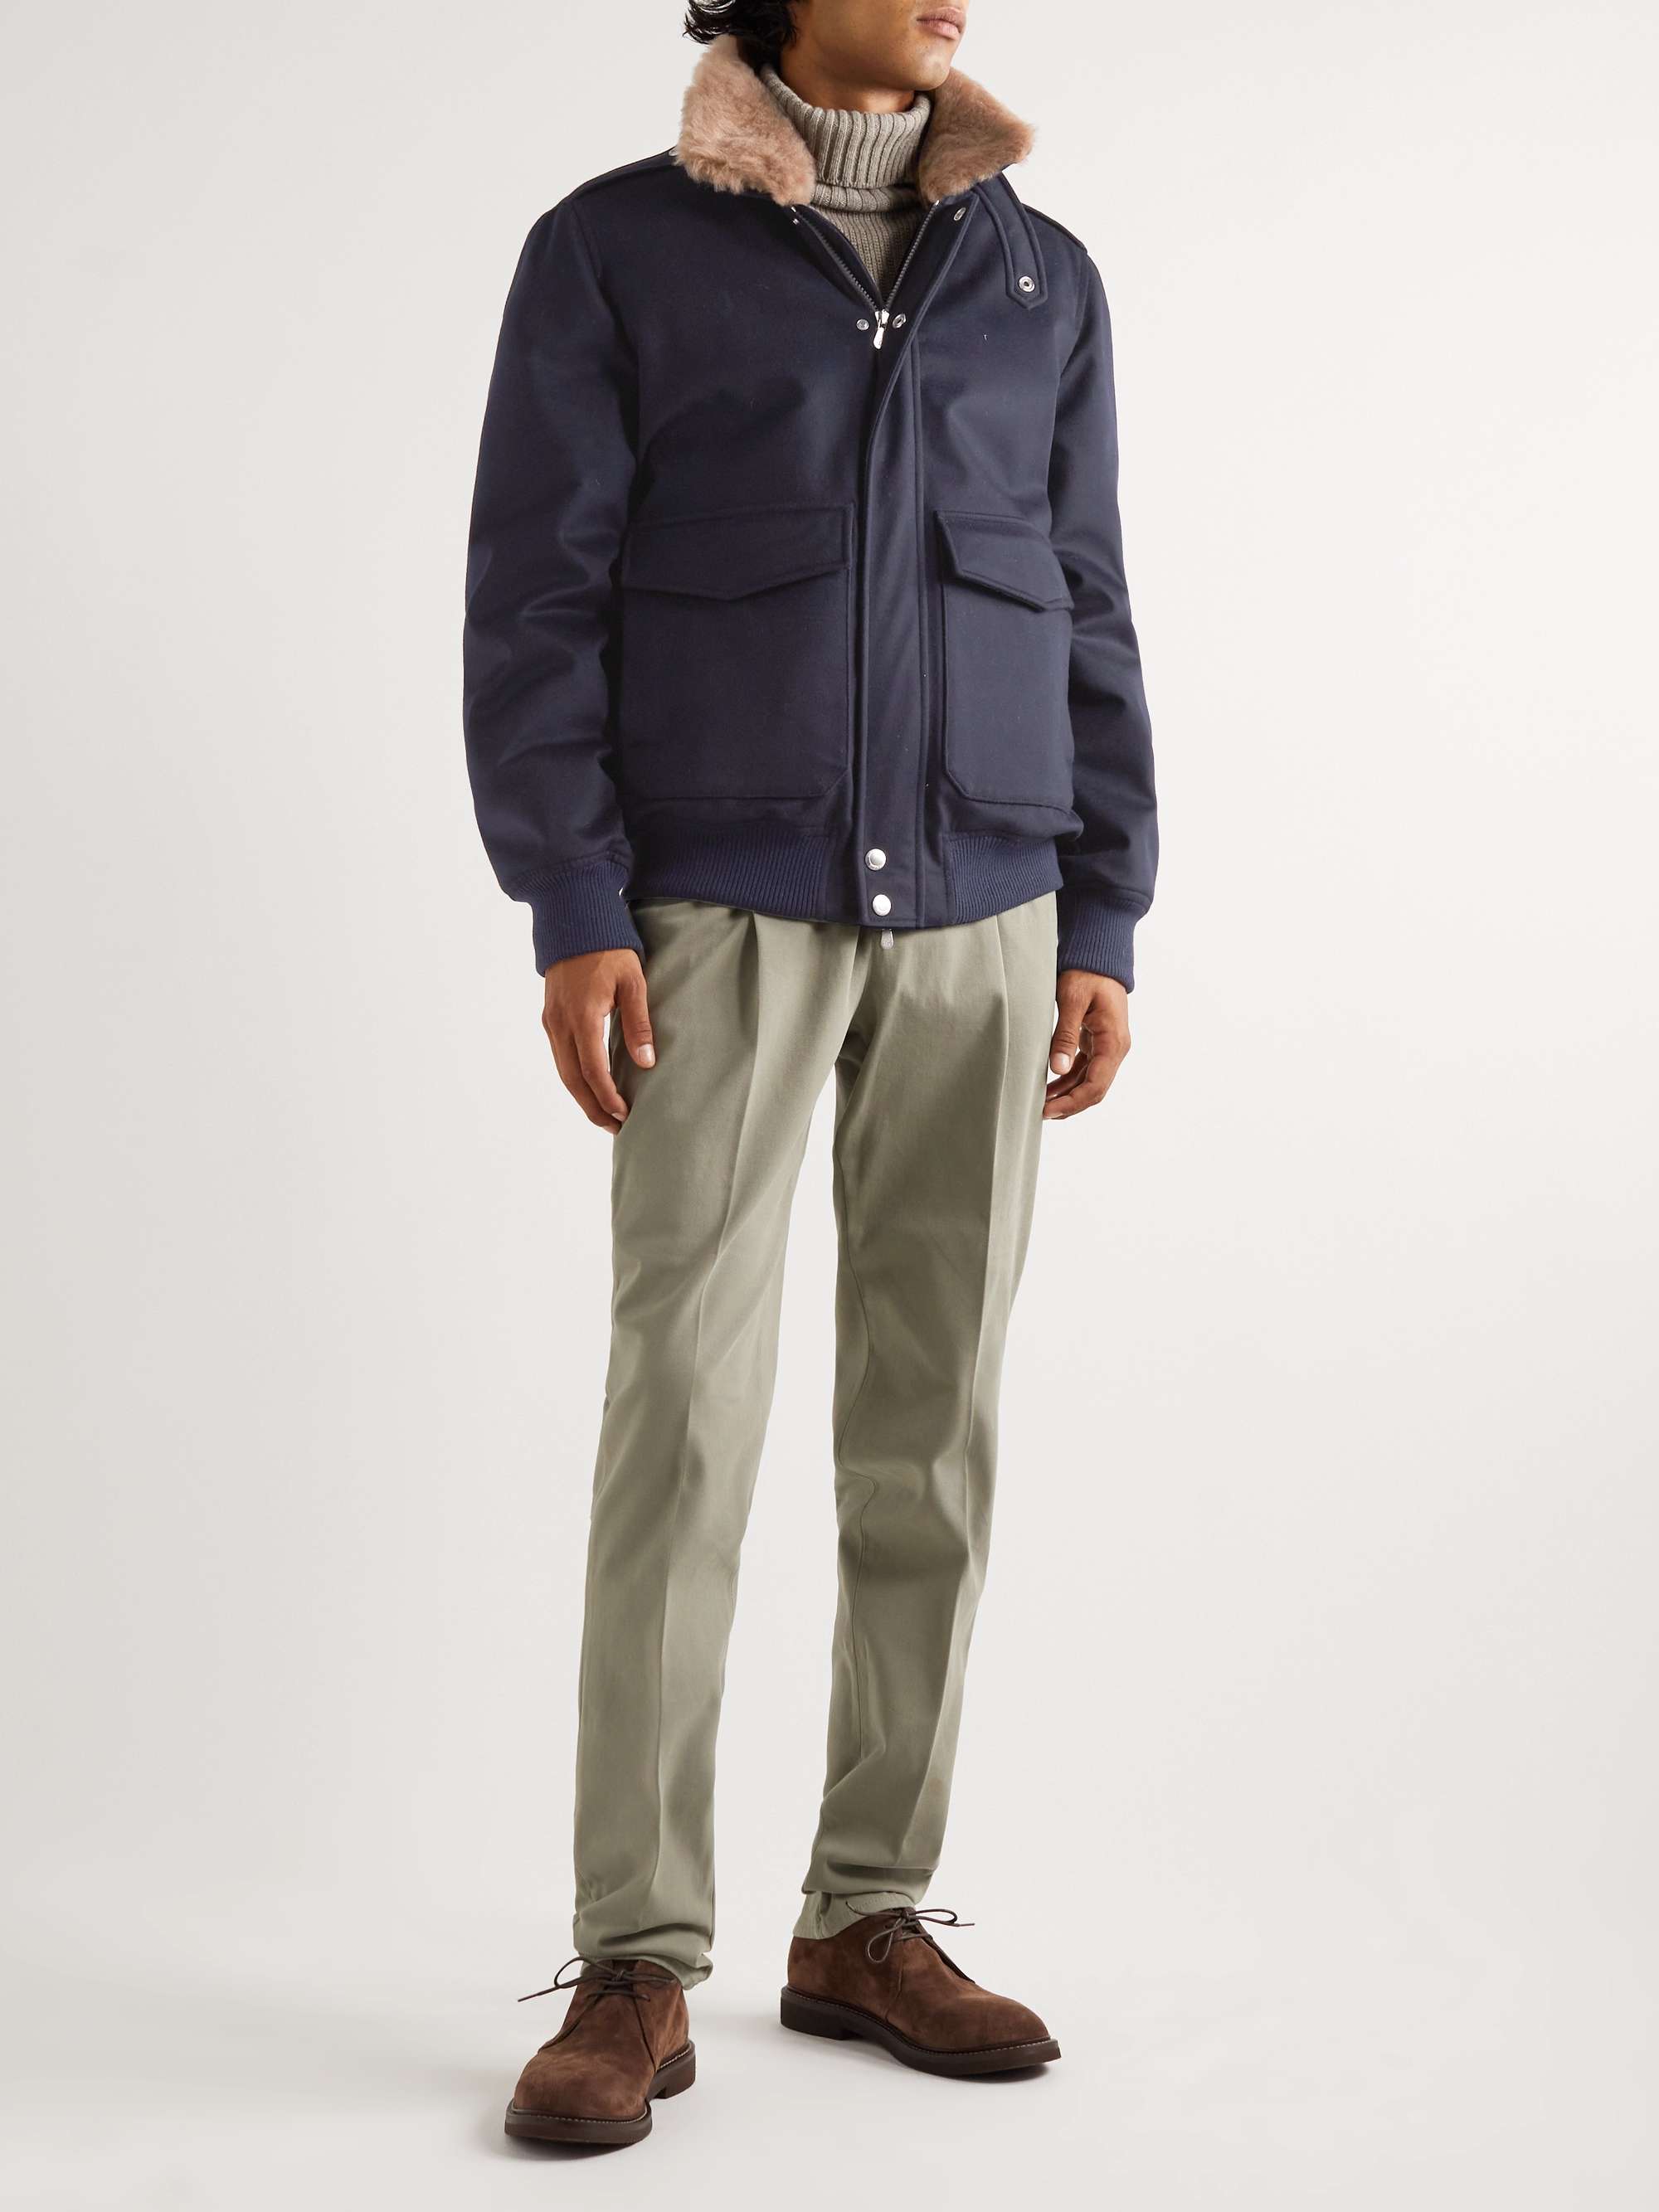 BRUNELLO CUCINELLI Shearling-Trimmed Padded Wool Bomber Jacket